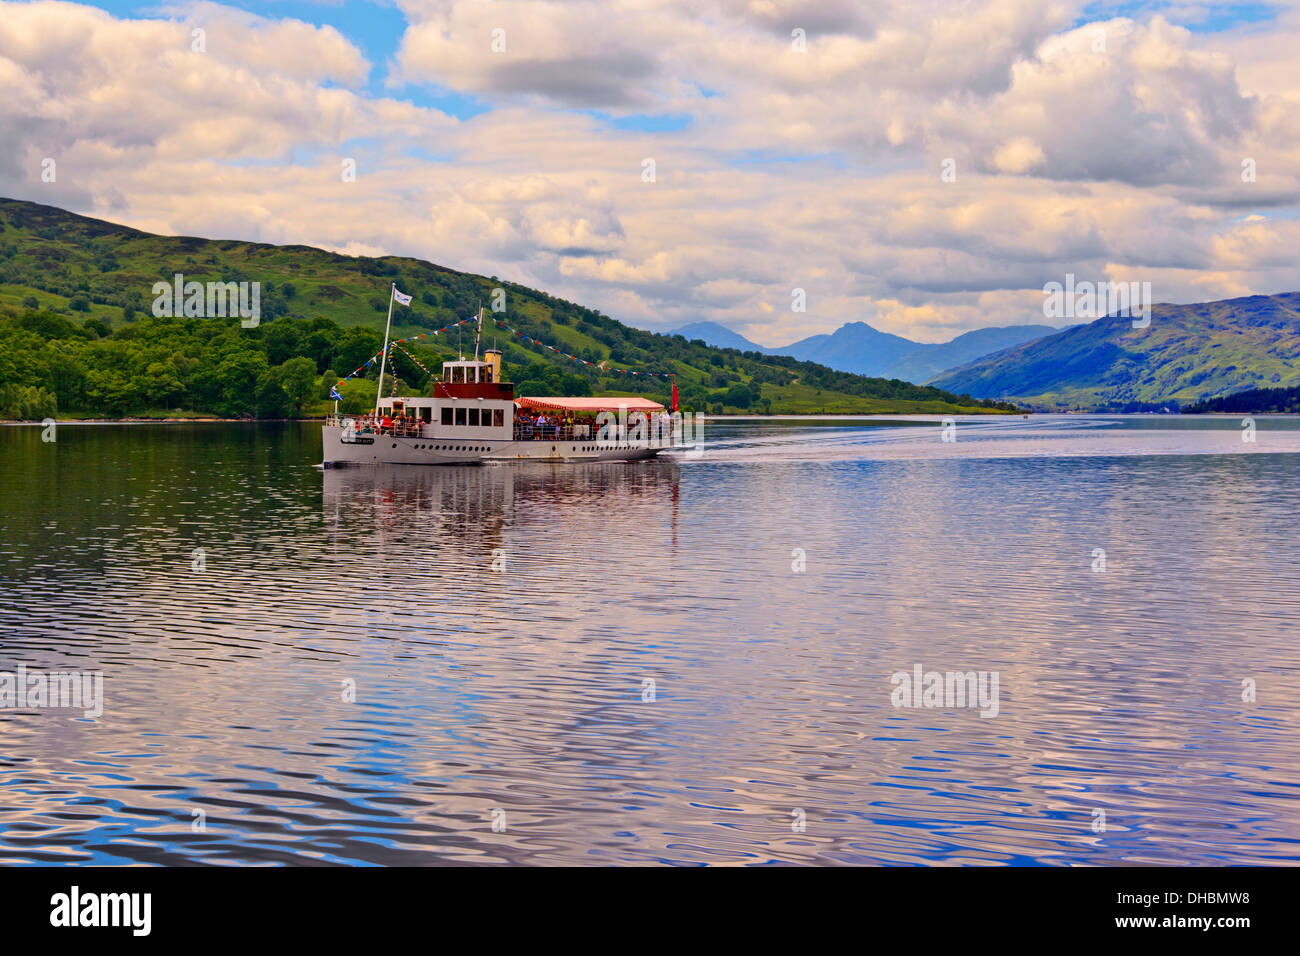 The Sir Walter Scott steamboat on Loch Katrine in the Trossachs National Park, Scotland Stock Photo